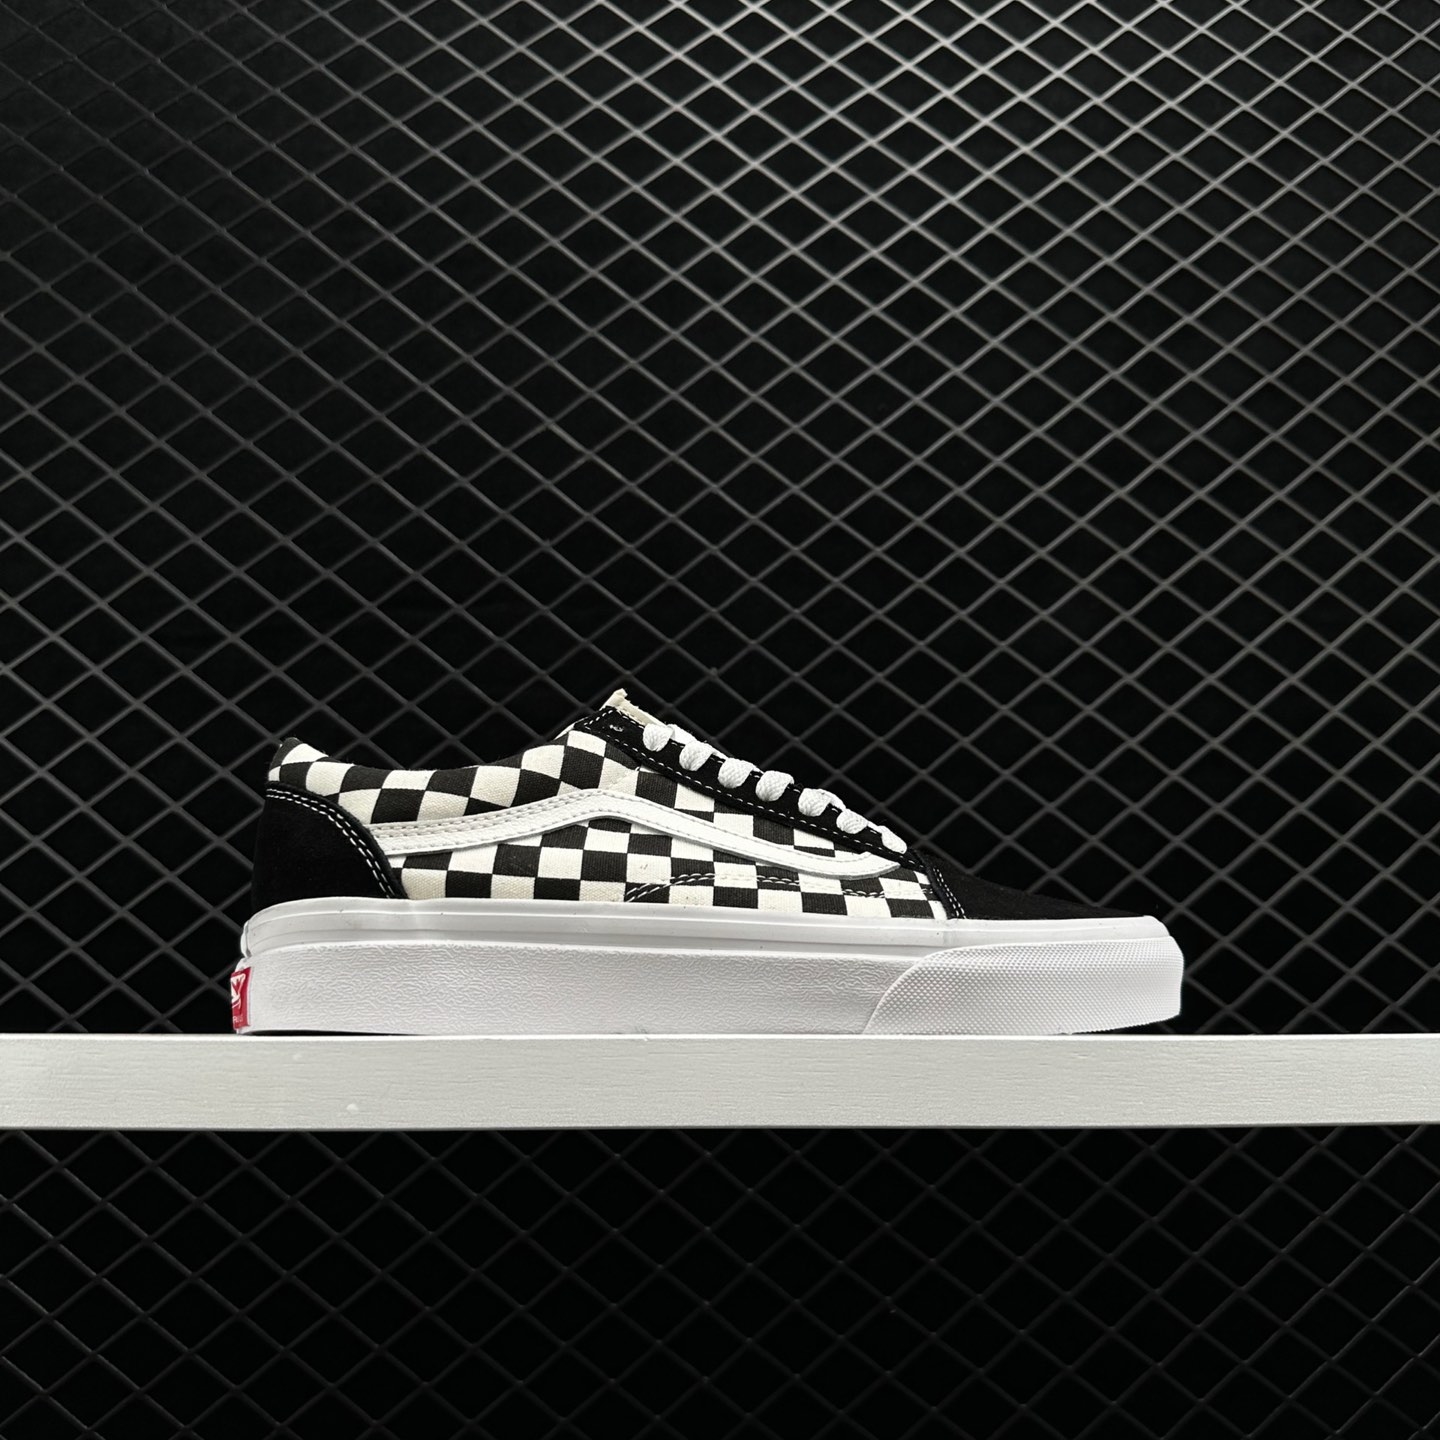 Vans OG Old Skool LX 'Checkerboard - Black' VN0A4P3X639 - Stylish and Classic Sneakers